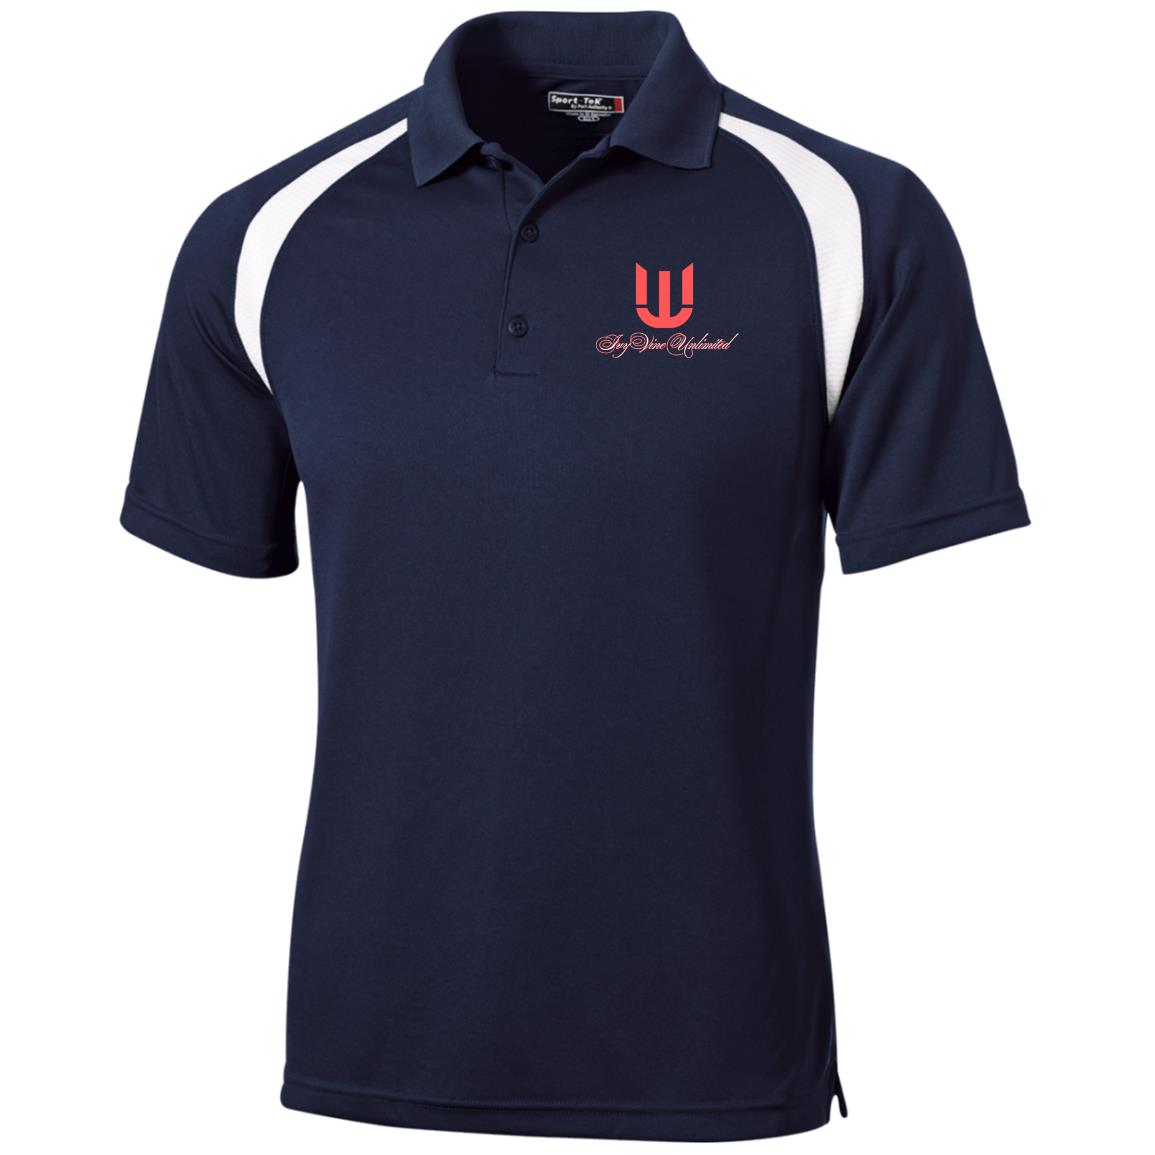 Ivyvine Unlimited Moisture-Wicking Tag-Free Golf Shirt